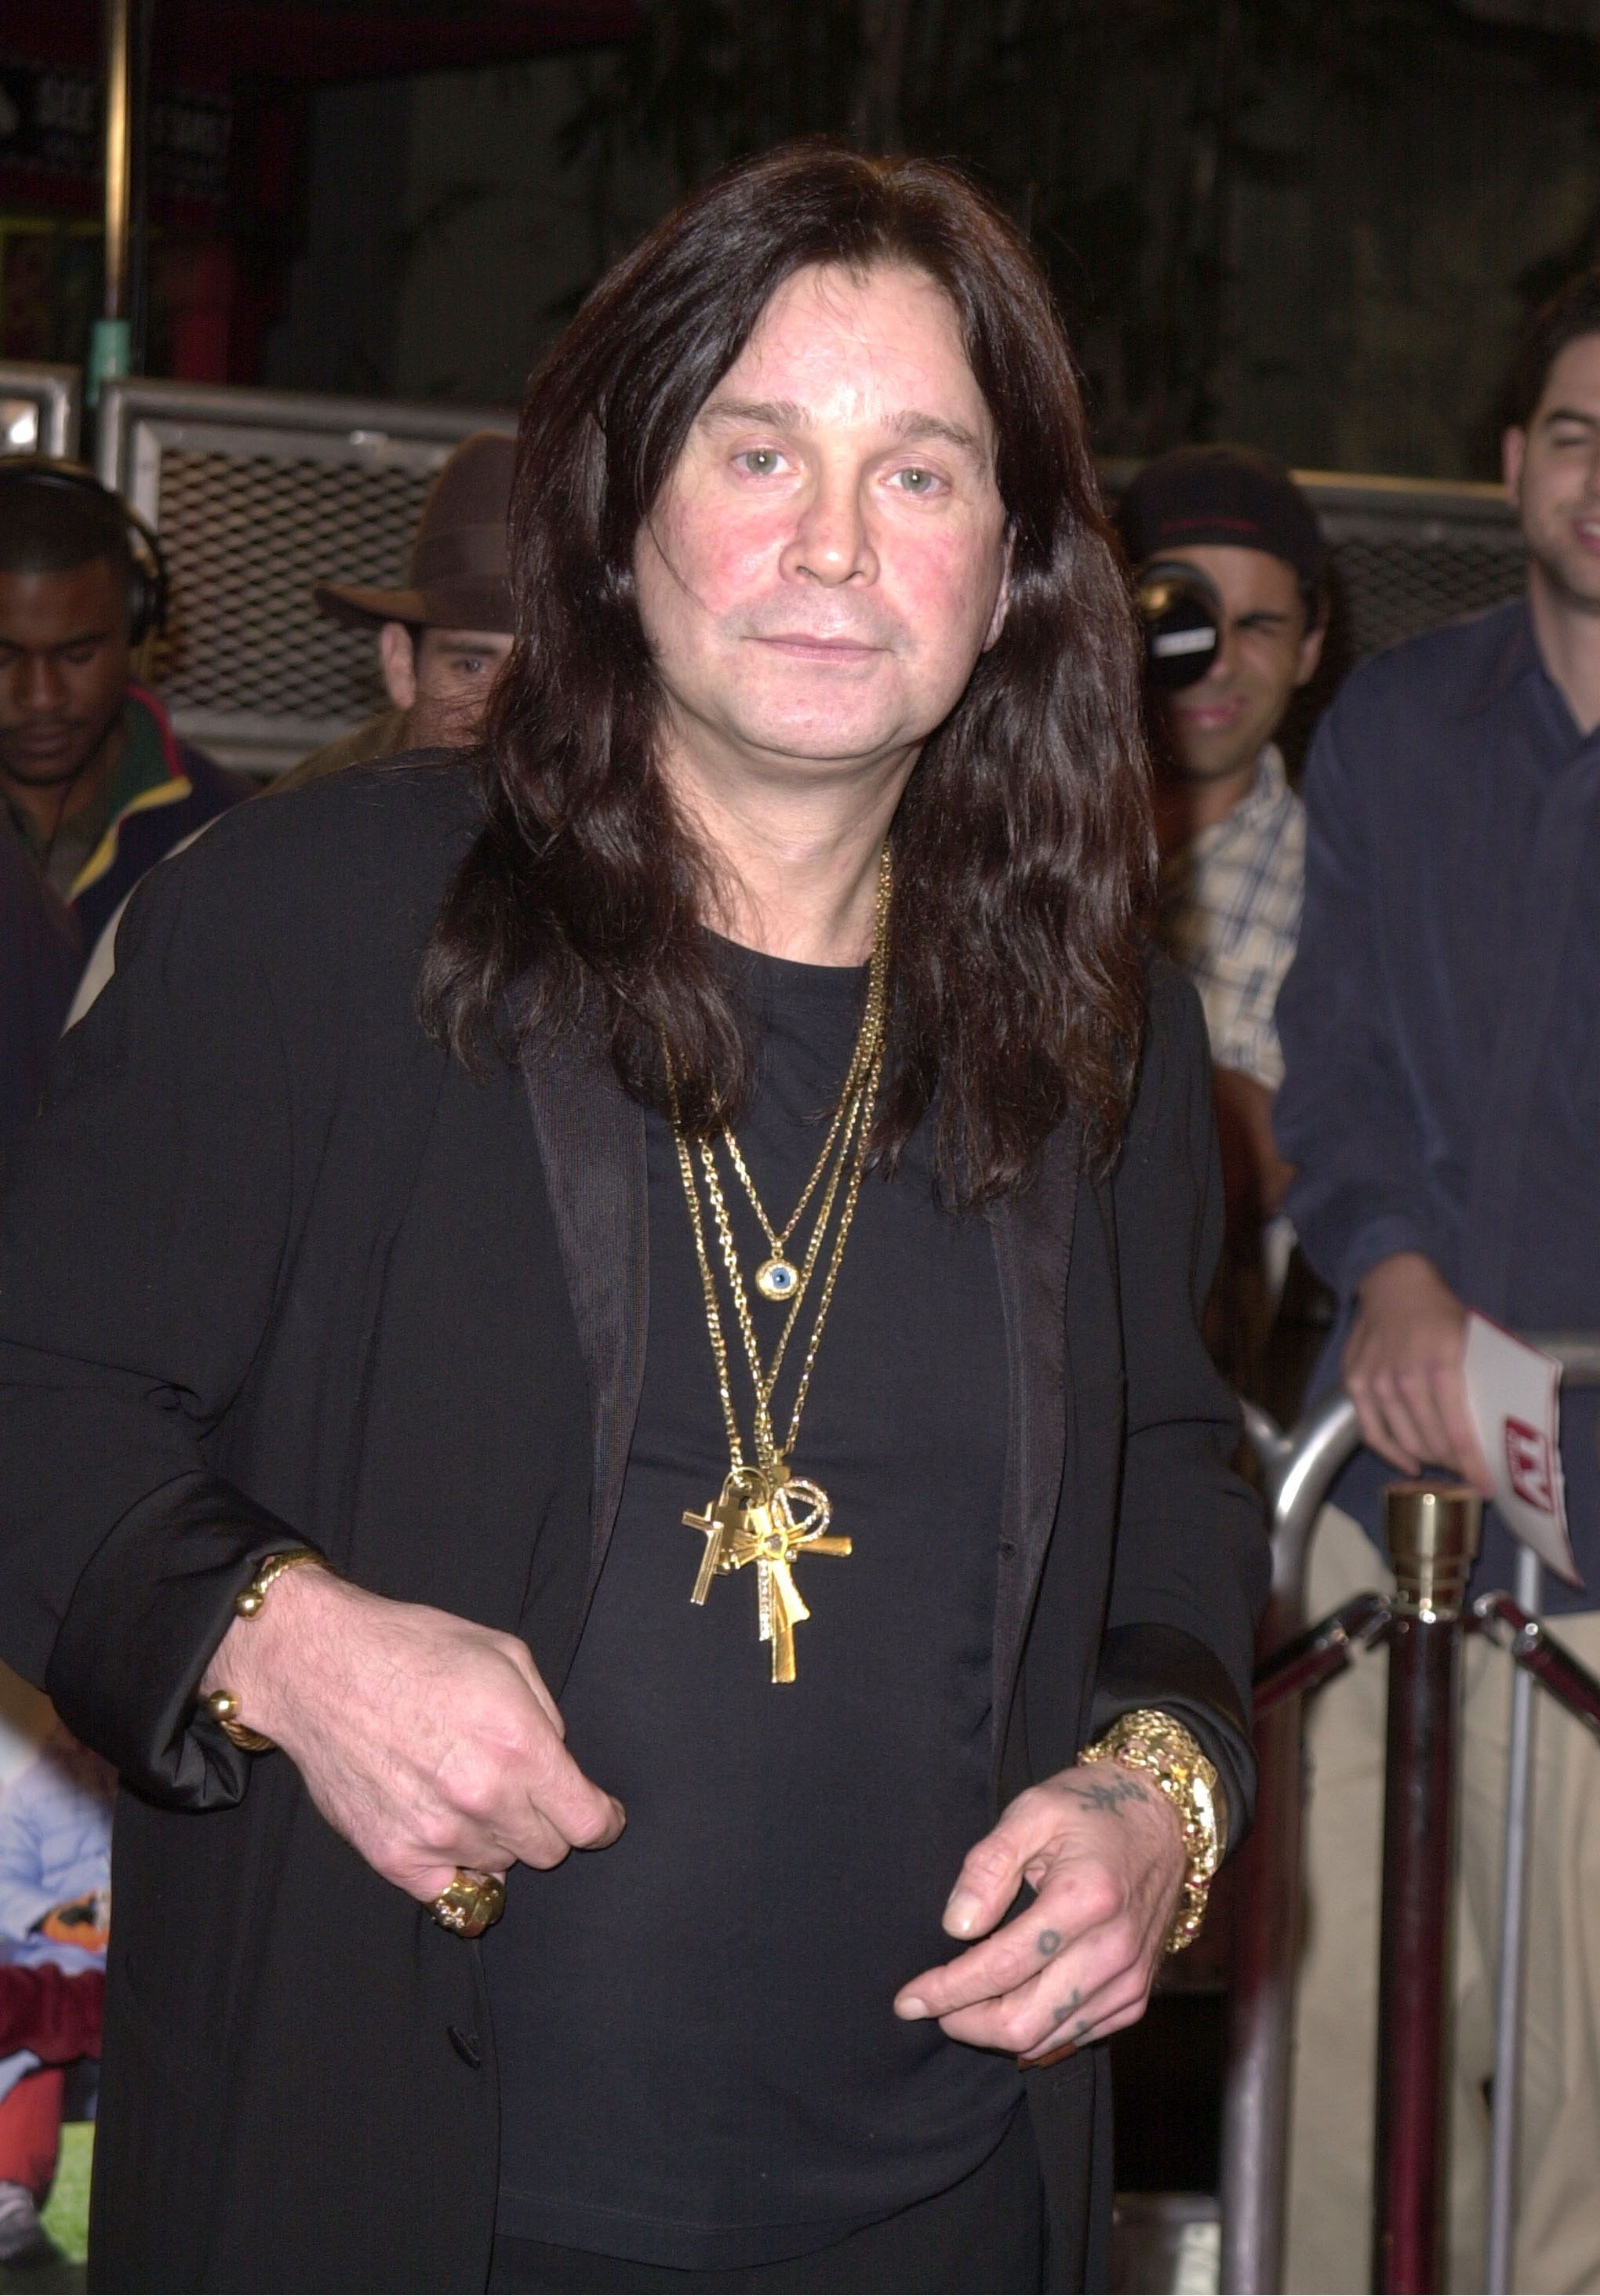 Ozzy Osbourne at the Hollywood Premiere of "Little Nicky" at Mann Chinese Theatre in Hollywood, California, United States. | Source: Getty Images